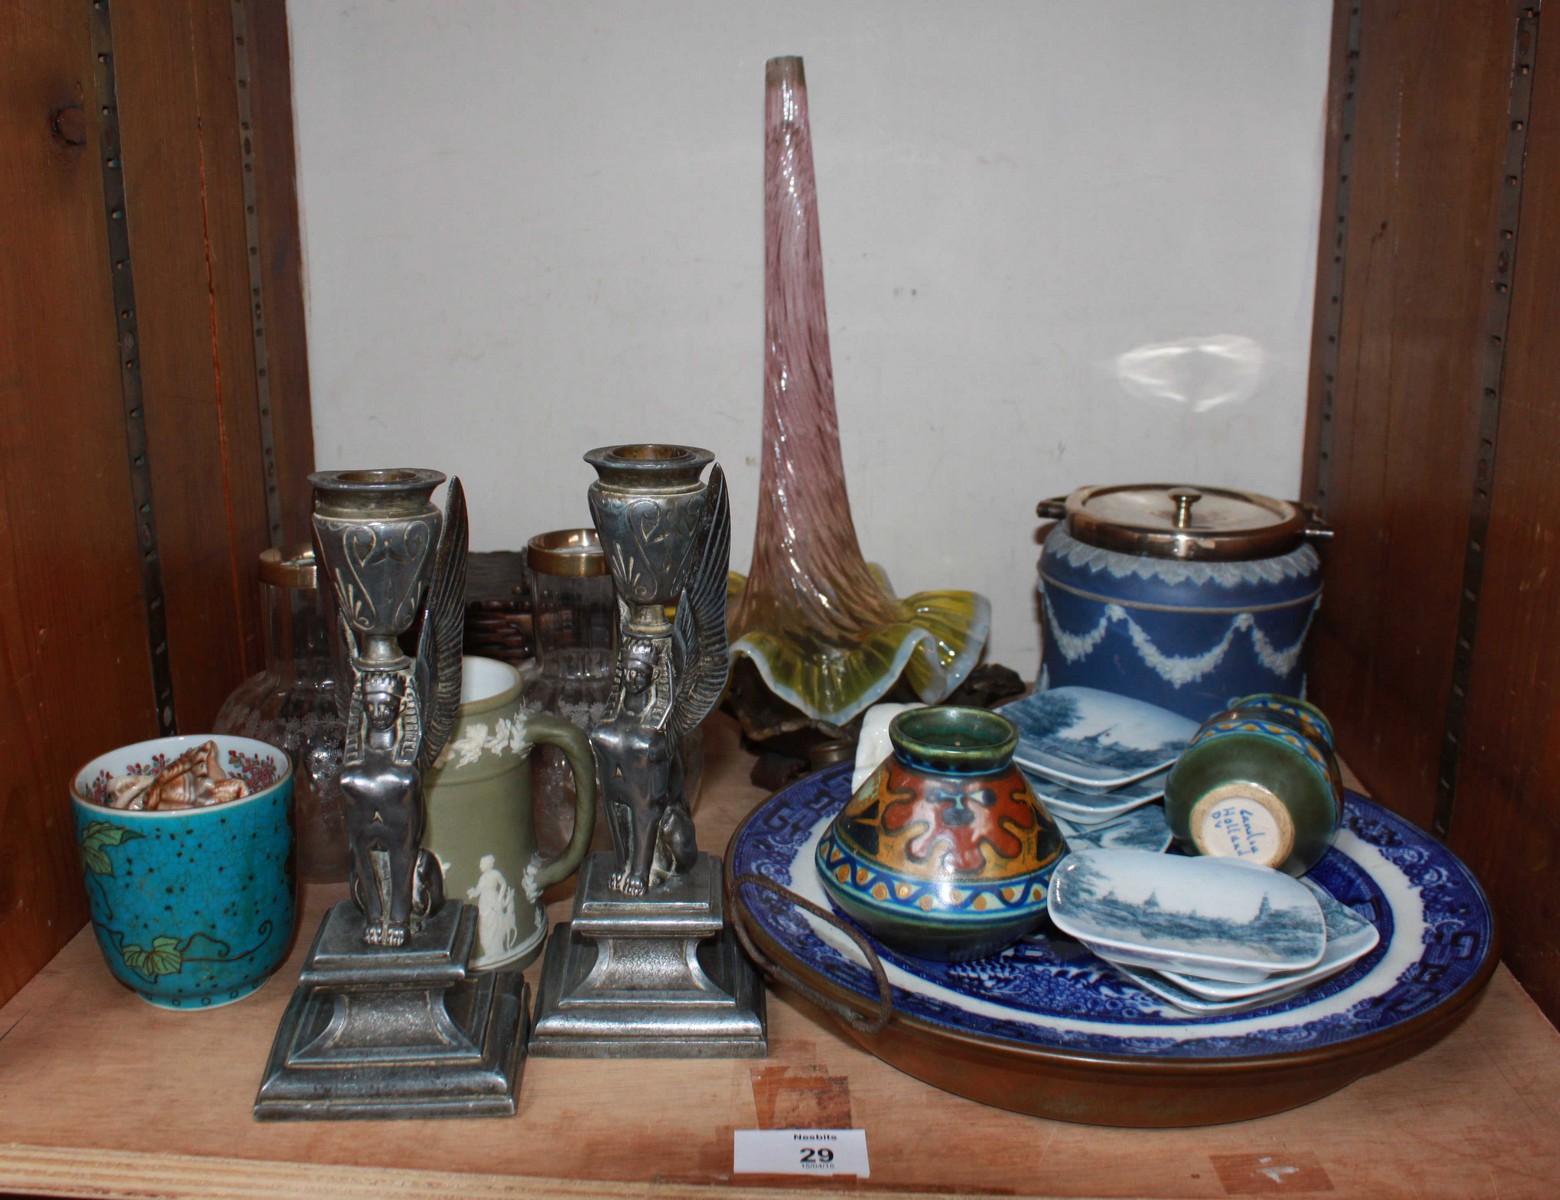 SECTION 29. A collection of assorted ceramics and other items including Gouda; a pair of silver